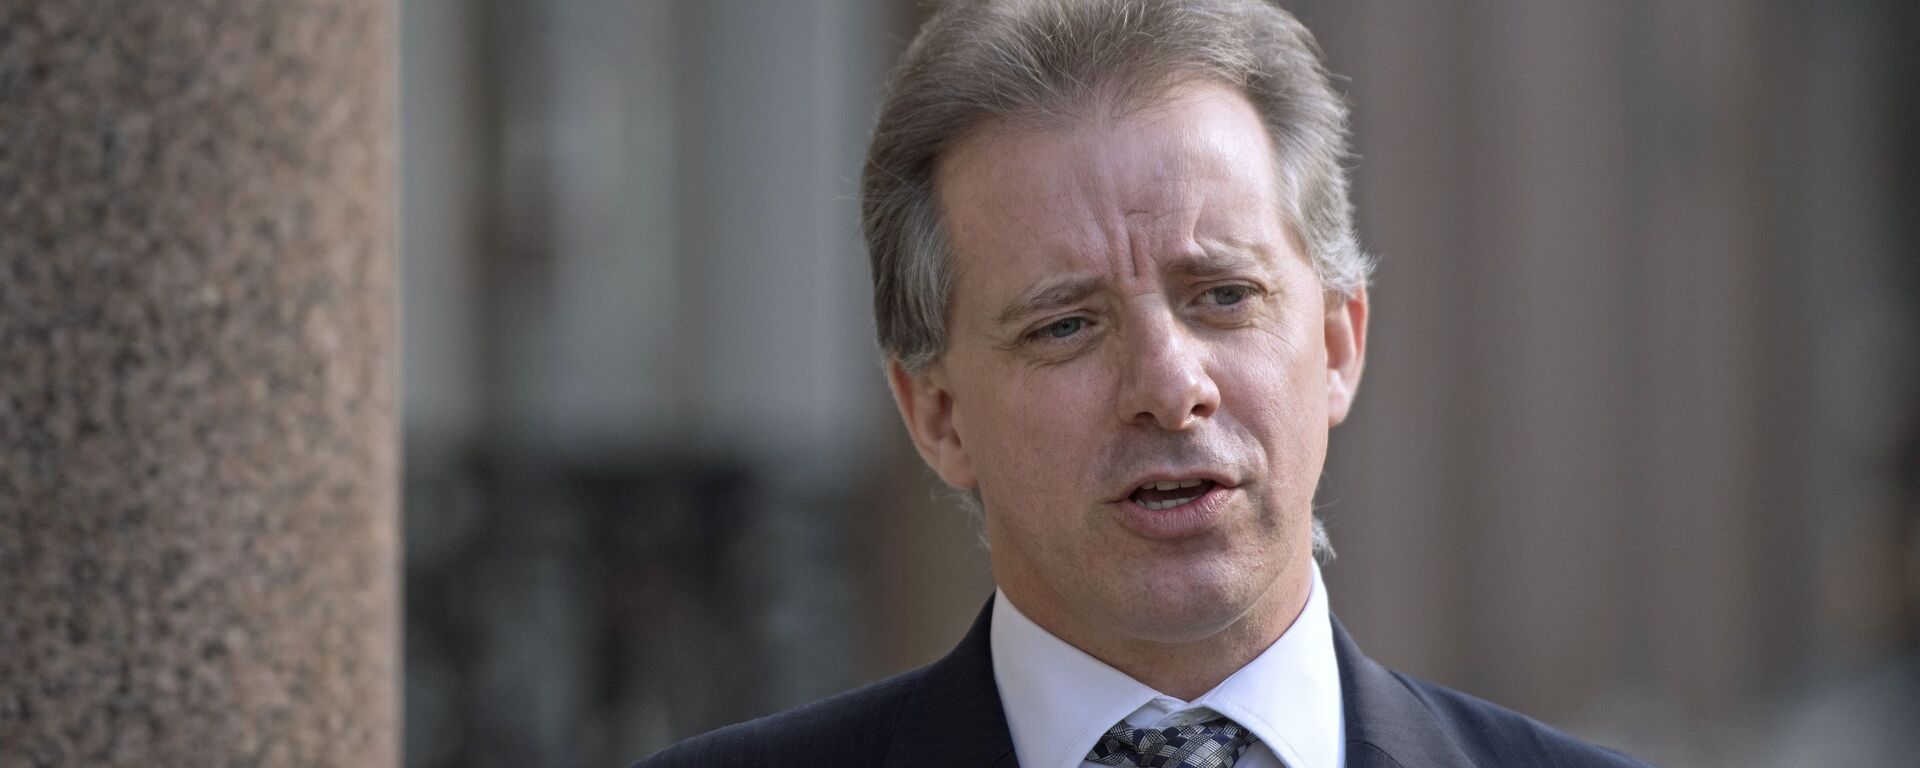 Christopher Steele, former British intelligence officer in London Tuesday March 7, 2017 where he has spoken to the media for the first time . Steele who compiled an explosive and unproven dossier on President Donald Trump’s purported activities in Russia has returned to work - Sputnik International, 1920, 18.10.2021